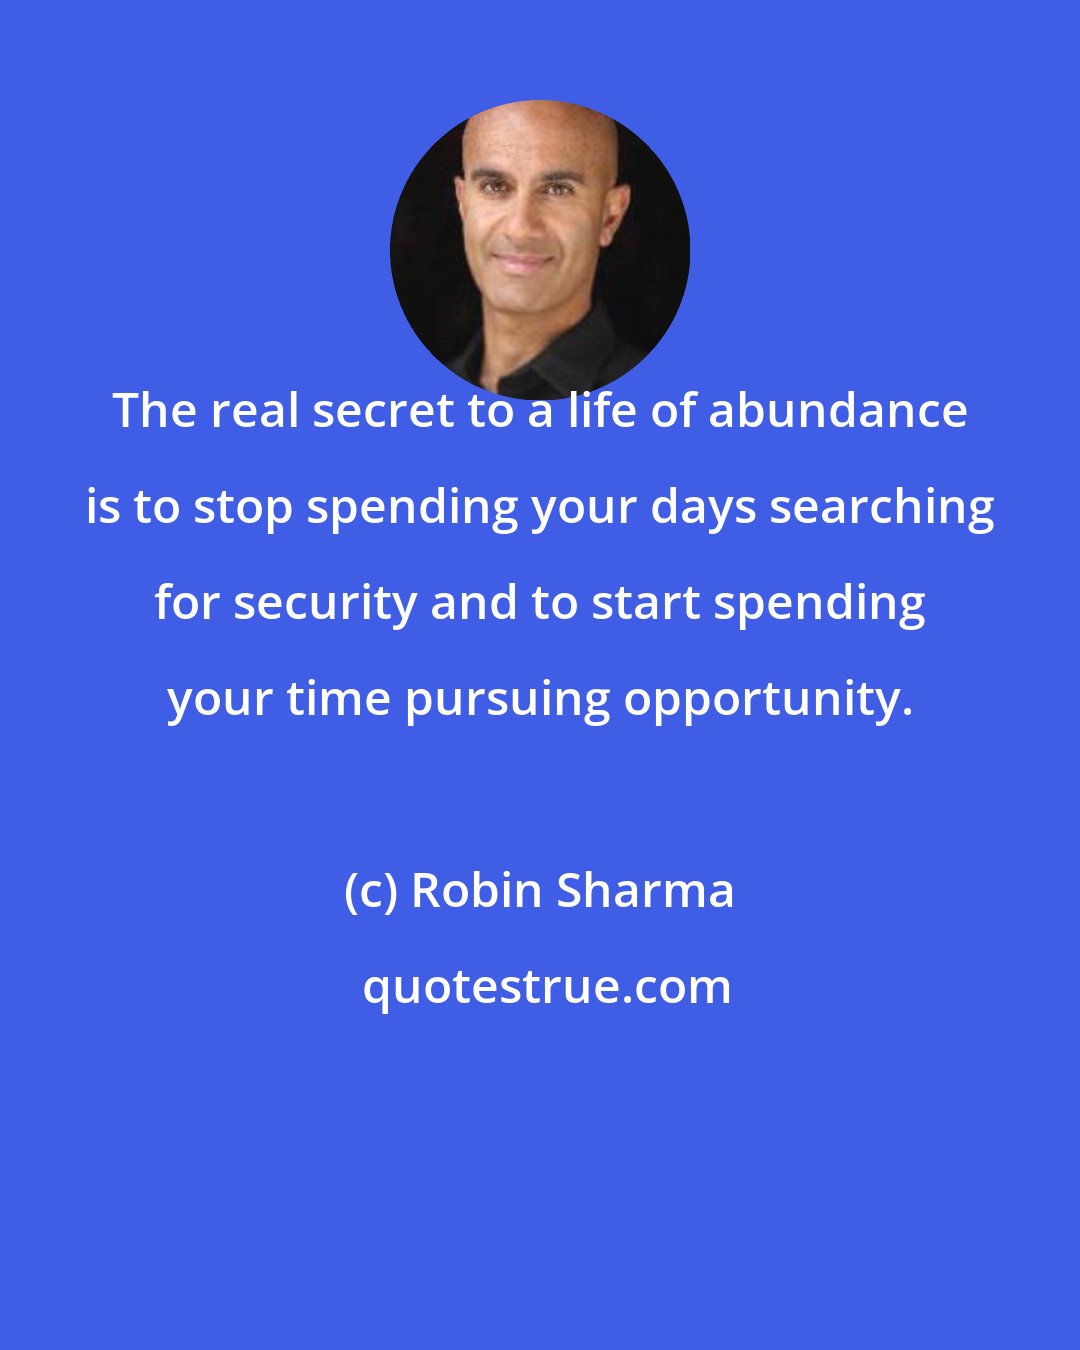 Robin Sharma: The real secret to a life of abundance is to stop spending your days searching for security and to start spending your time pursuing opportunity.